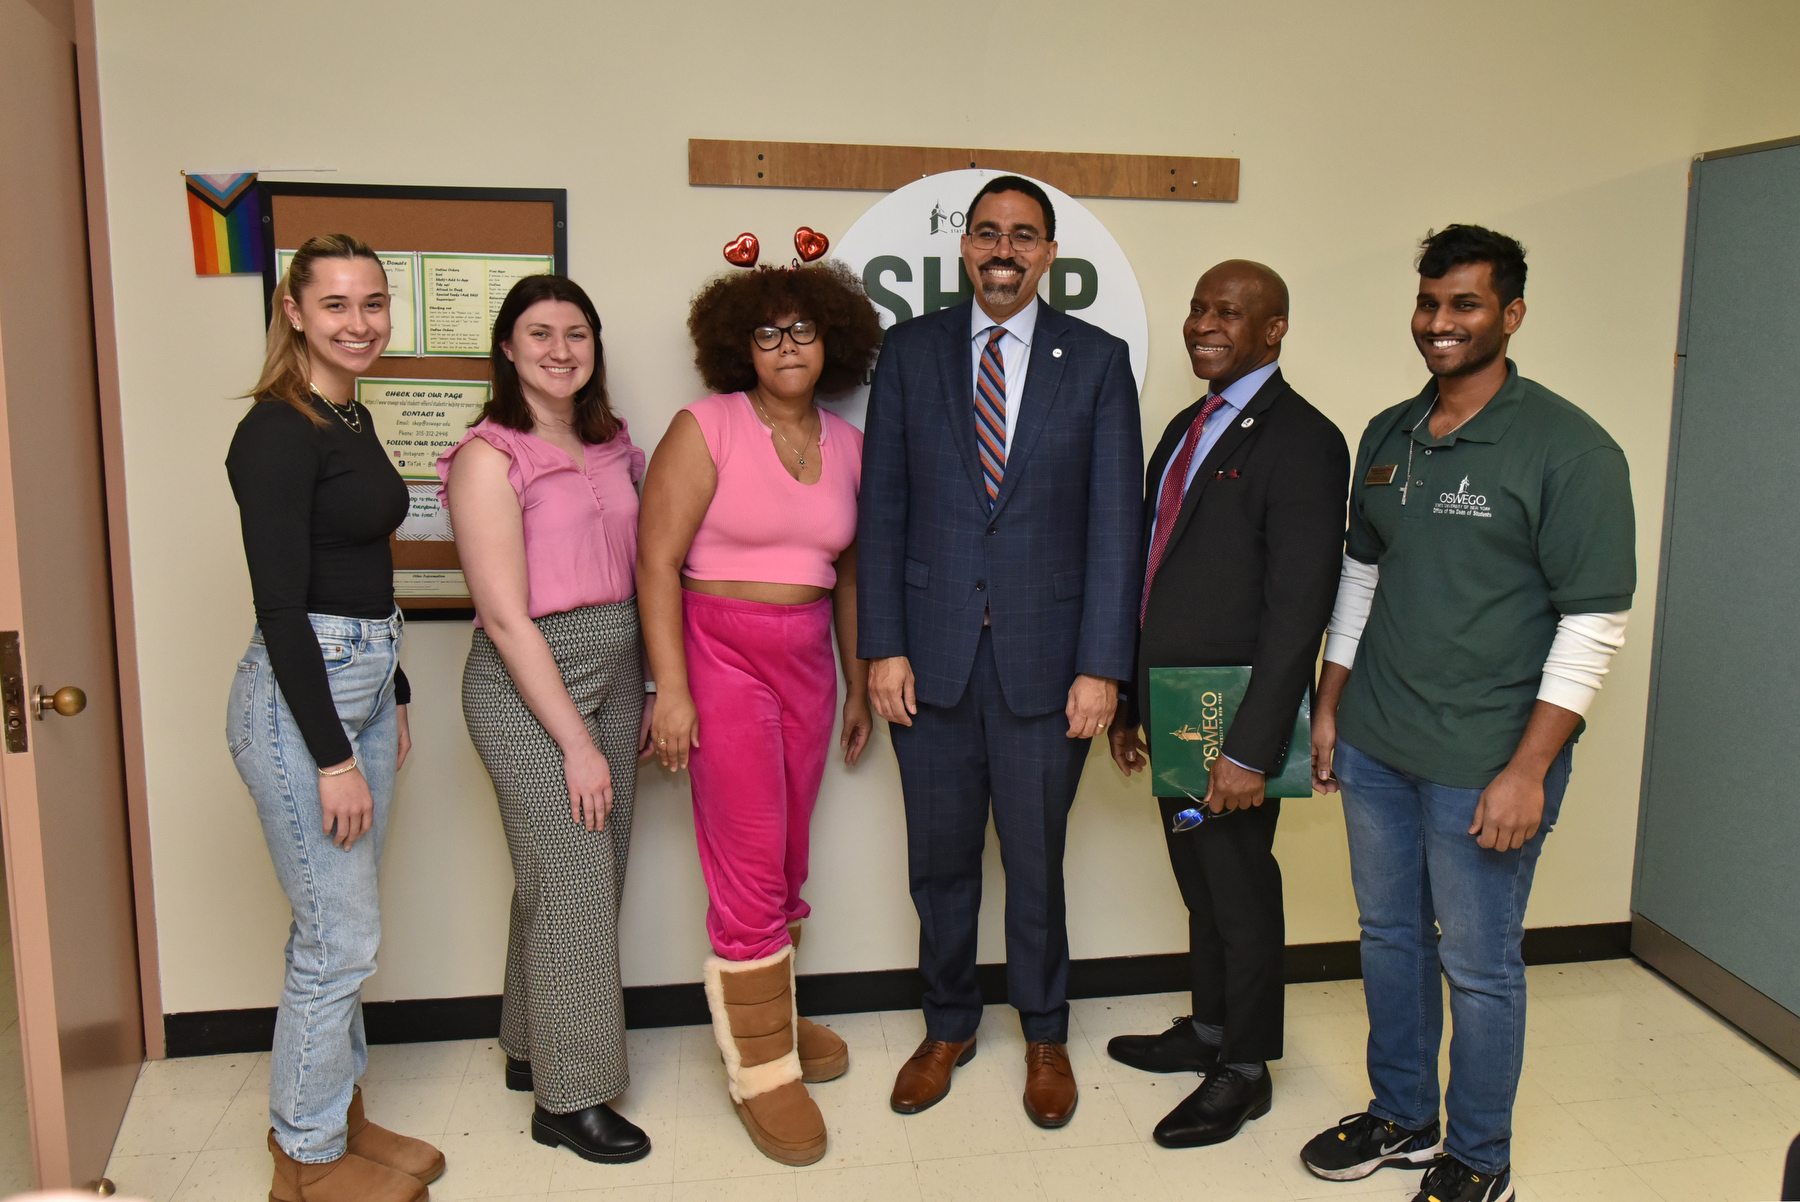 SUNY Chancellor John B. King Jr. and SUNY Oswego President Peter O. Nwosu toured the Students Helping Oz Peers (SHOP) pantry located in Penfield Library and met with student staff.